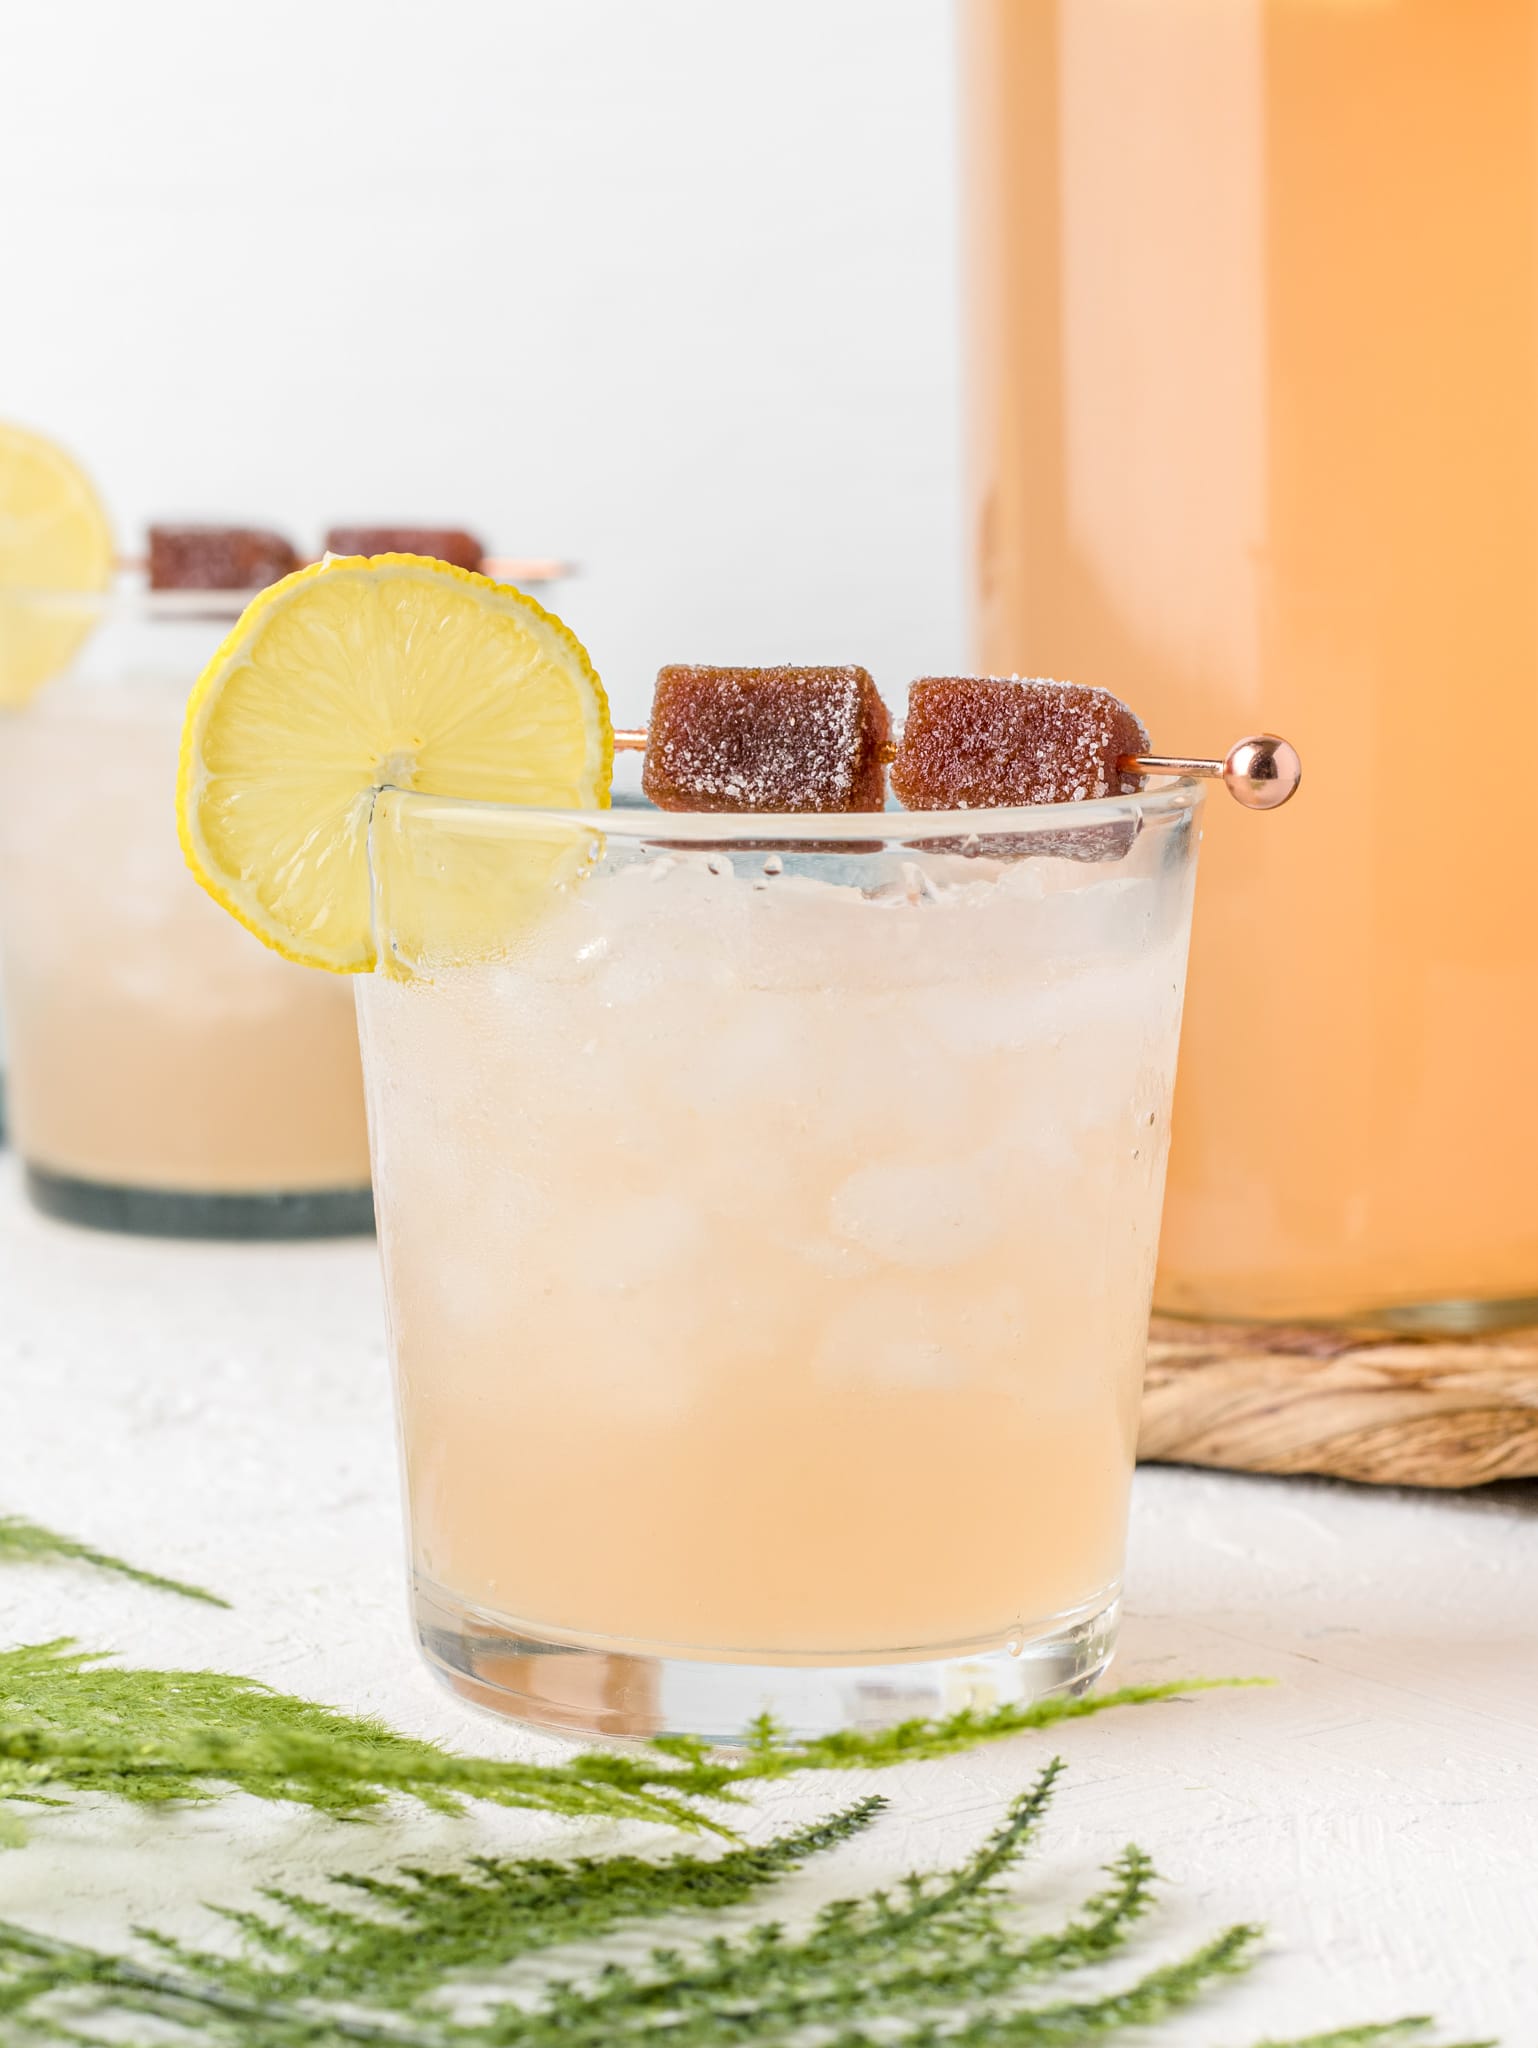 Guava Lemonade Fizz in glasses garnished with a lemon slice and candied guava paste on skewers.